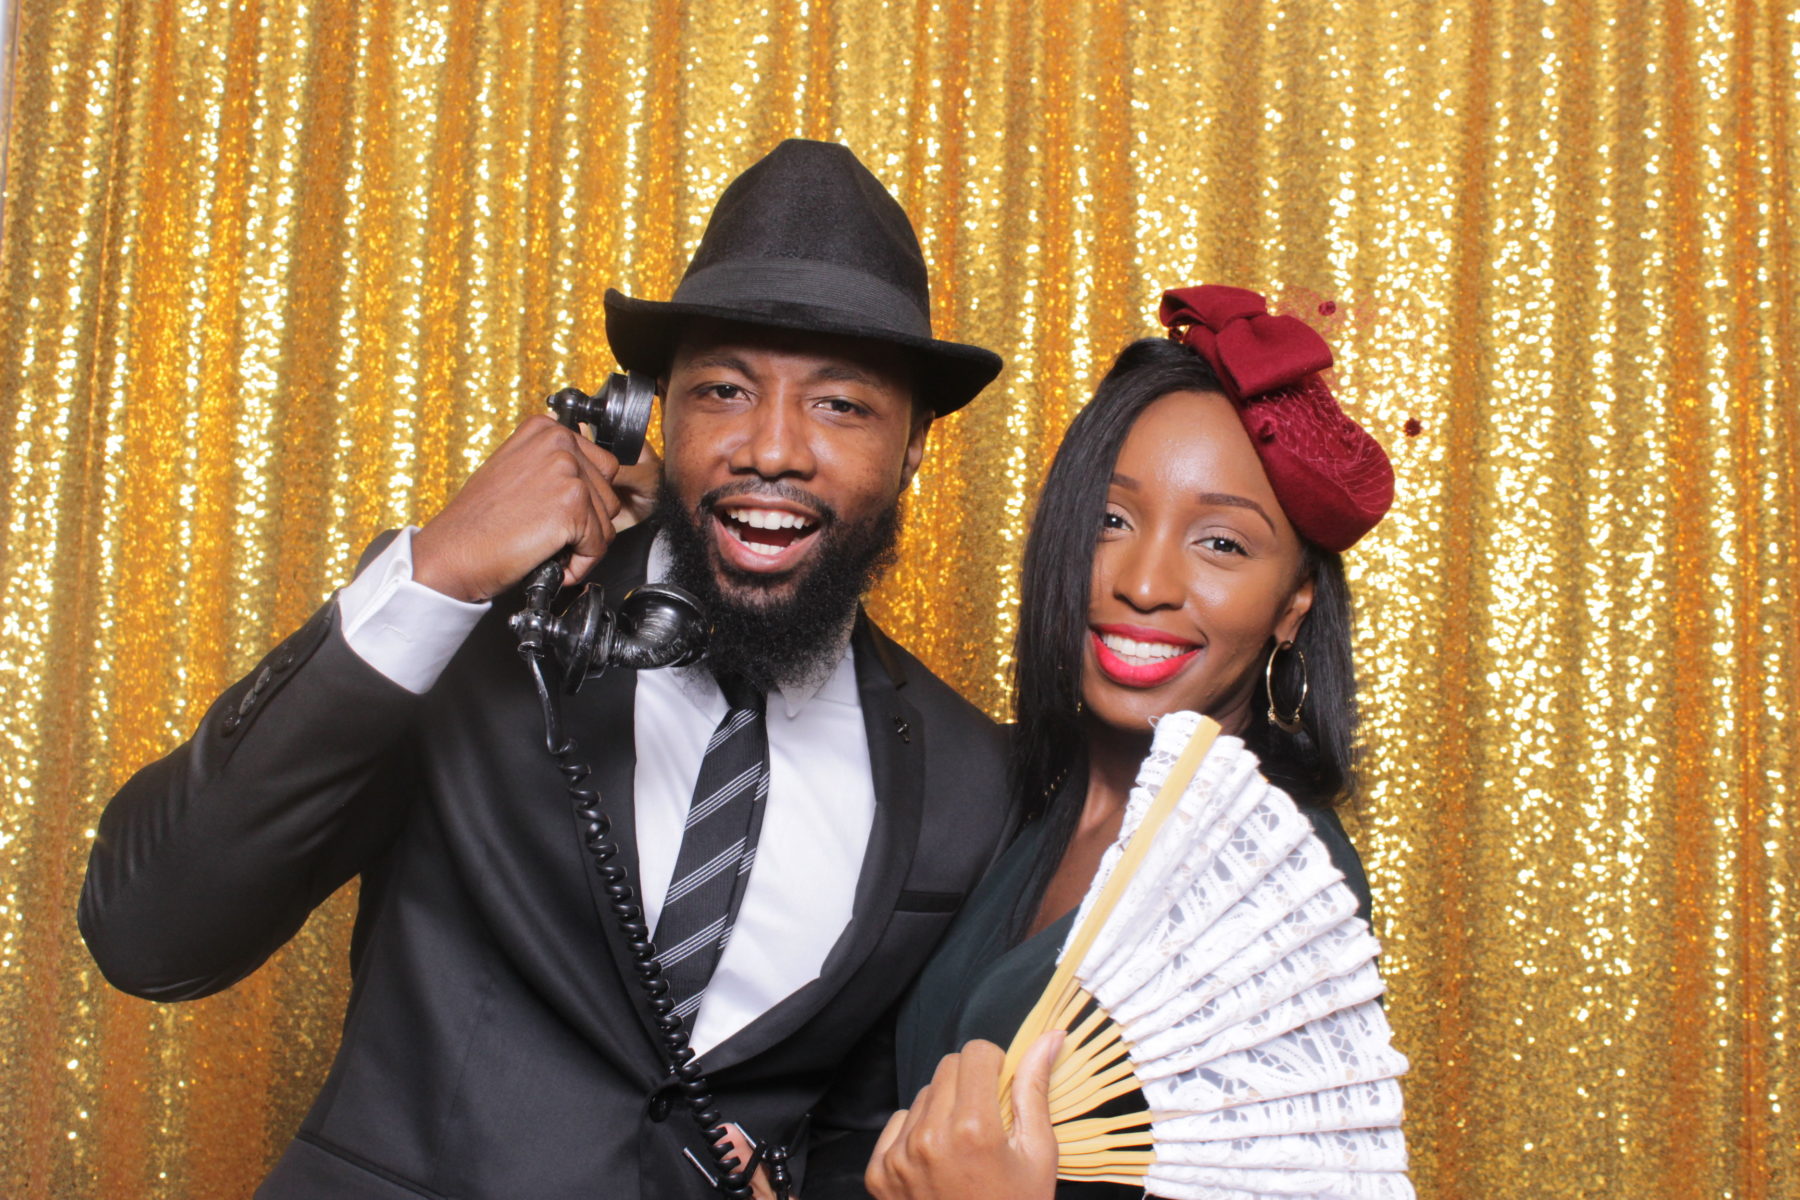 Why Open Air Photo Booths are the BEST Choice